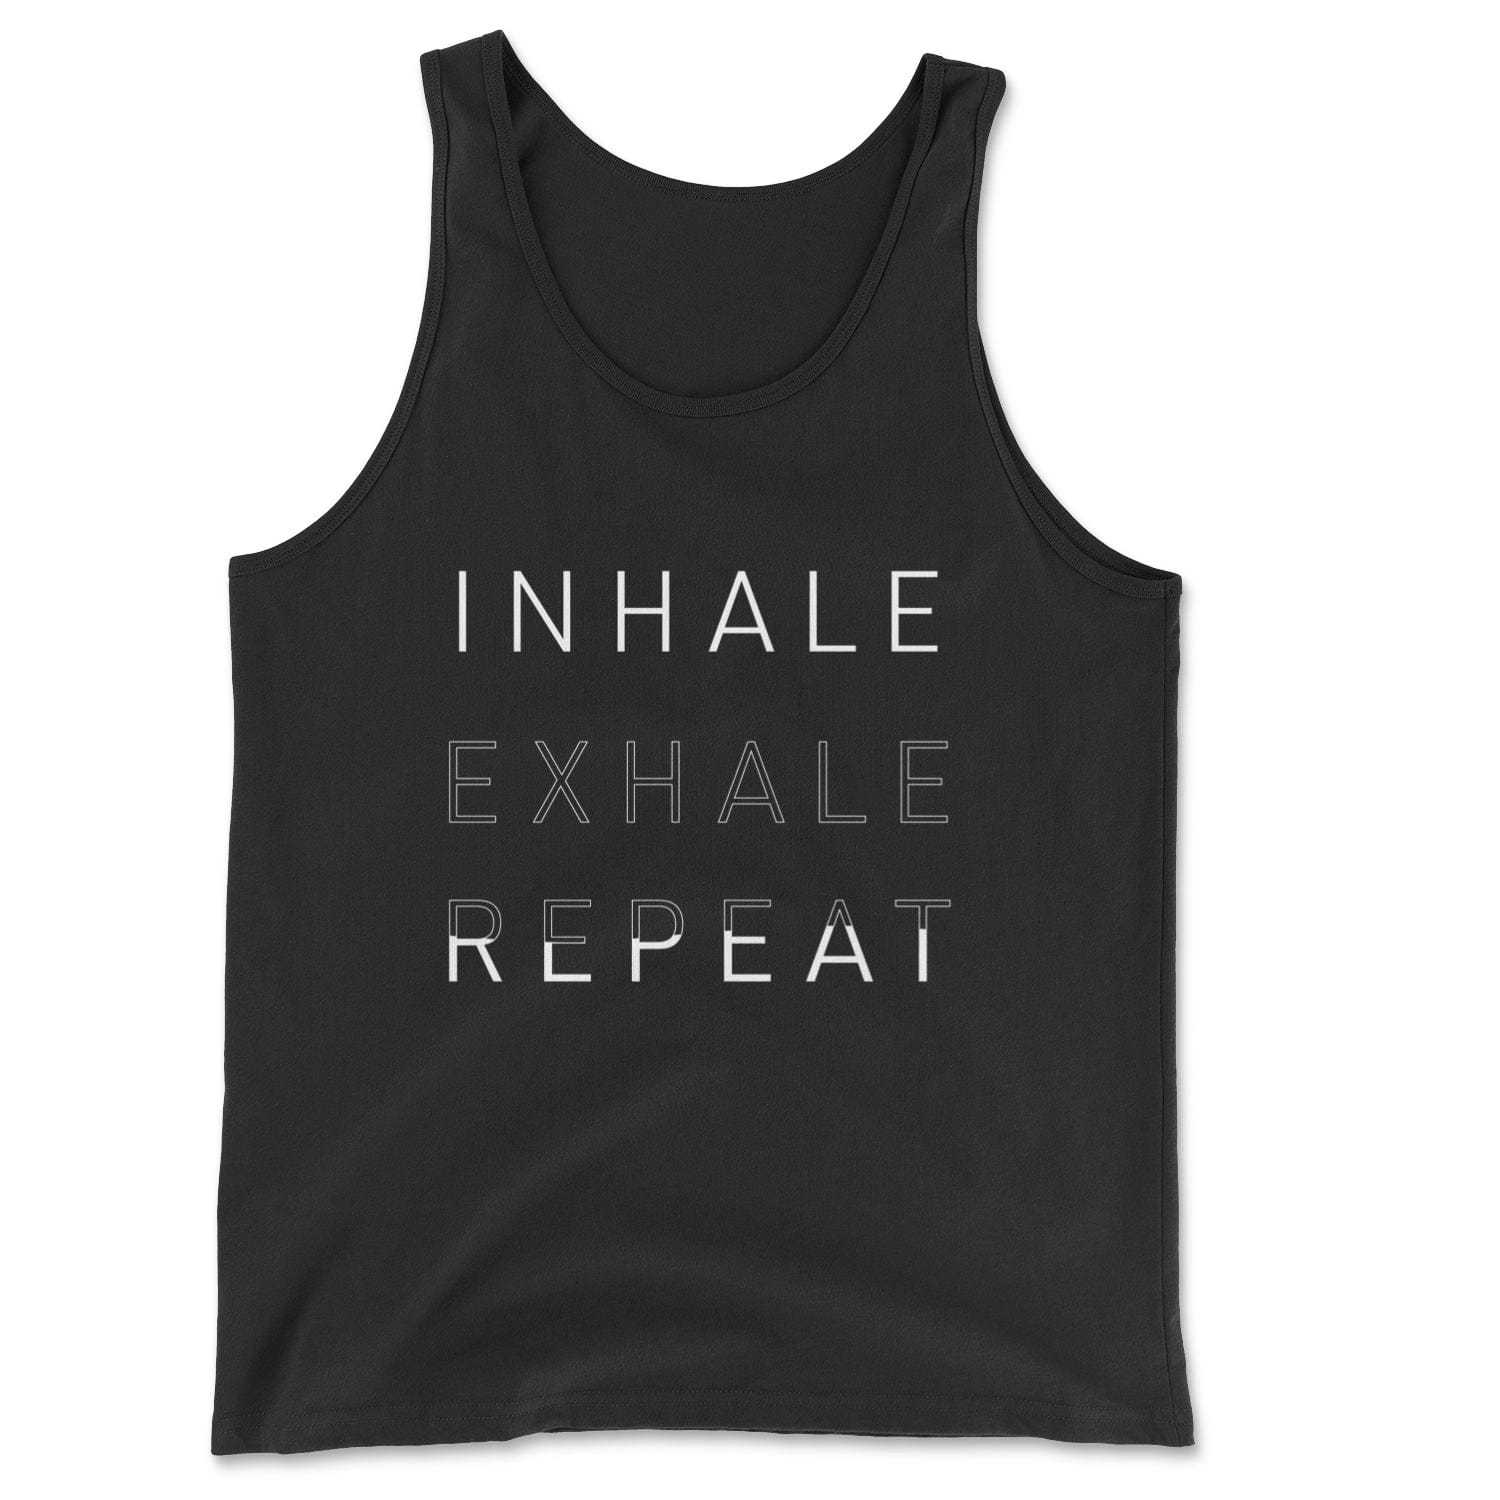 "Inhale Exhale Repeat" Pilates Principles - Classic Tank Skyba Print Material